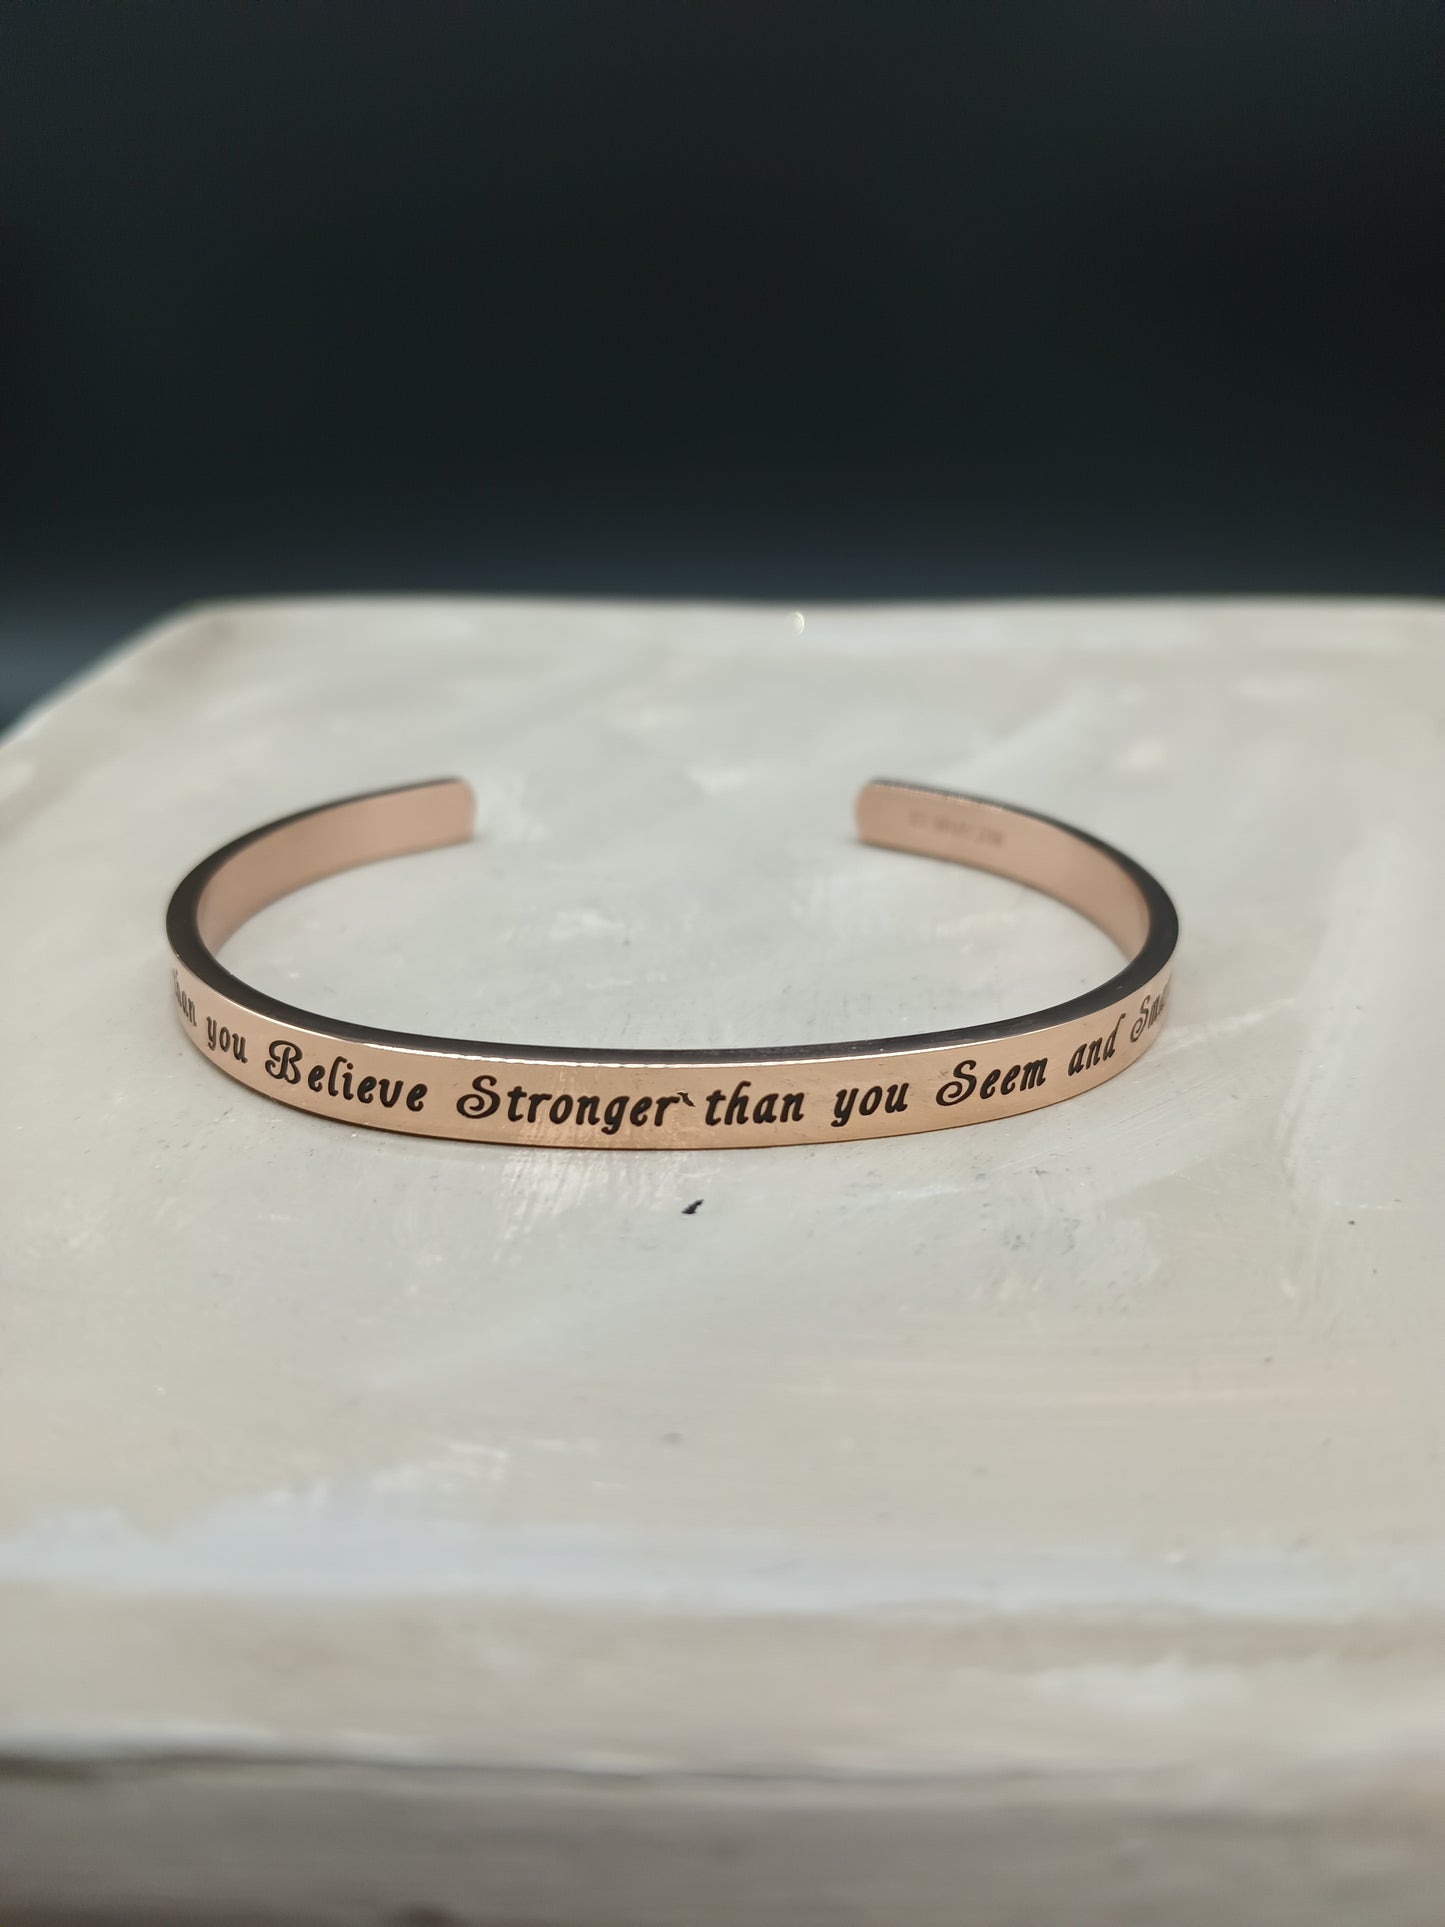 Kendasun Jewelry Cuff Bangle Bracelet  “You are Braver than you Believe Stronger than you Seem and Smarter than you Think”